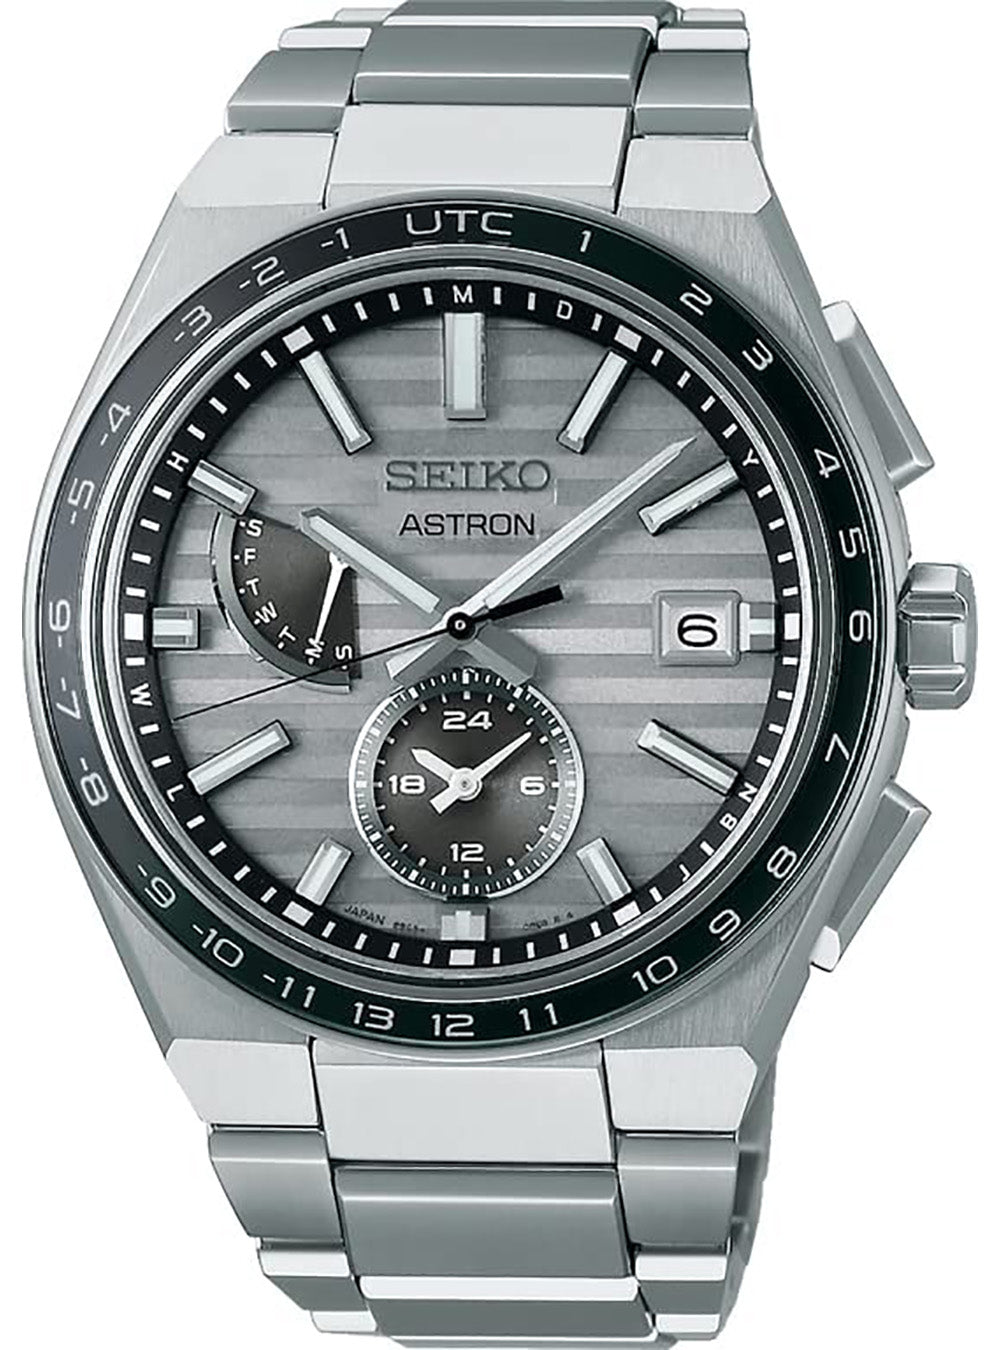 SEIKO ASTRON NEXTER SBXY043 LIMITED EDITION MADE IN JAPAN JDM